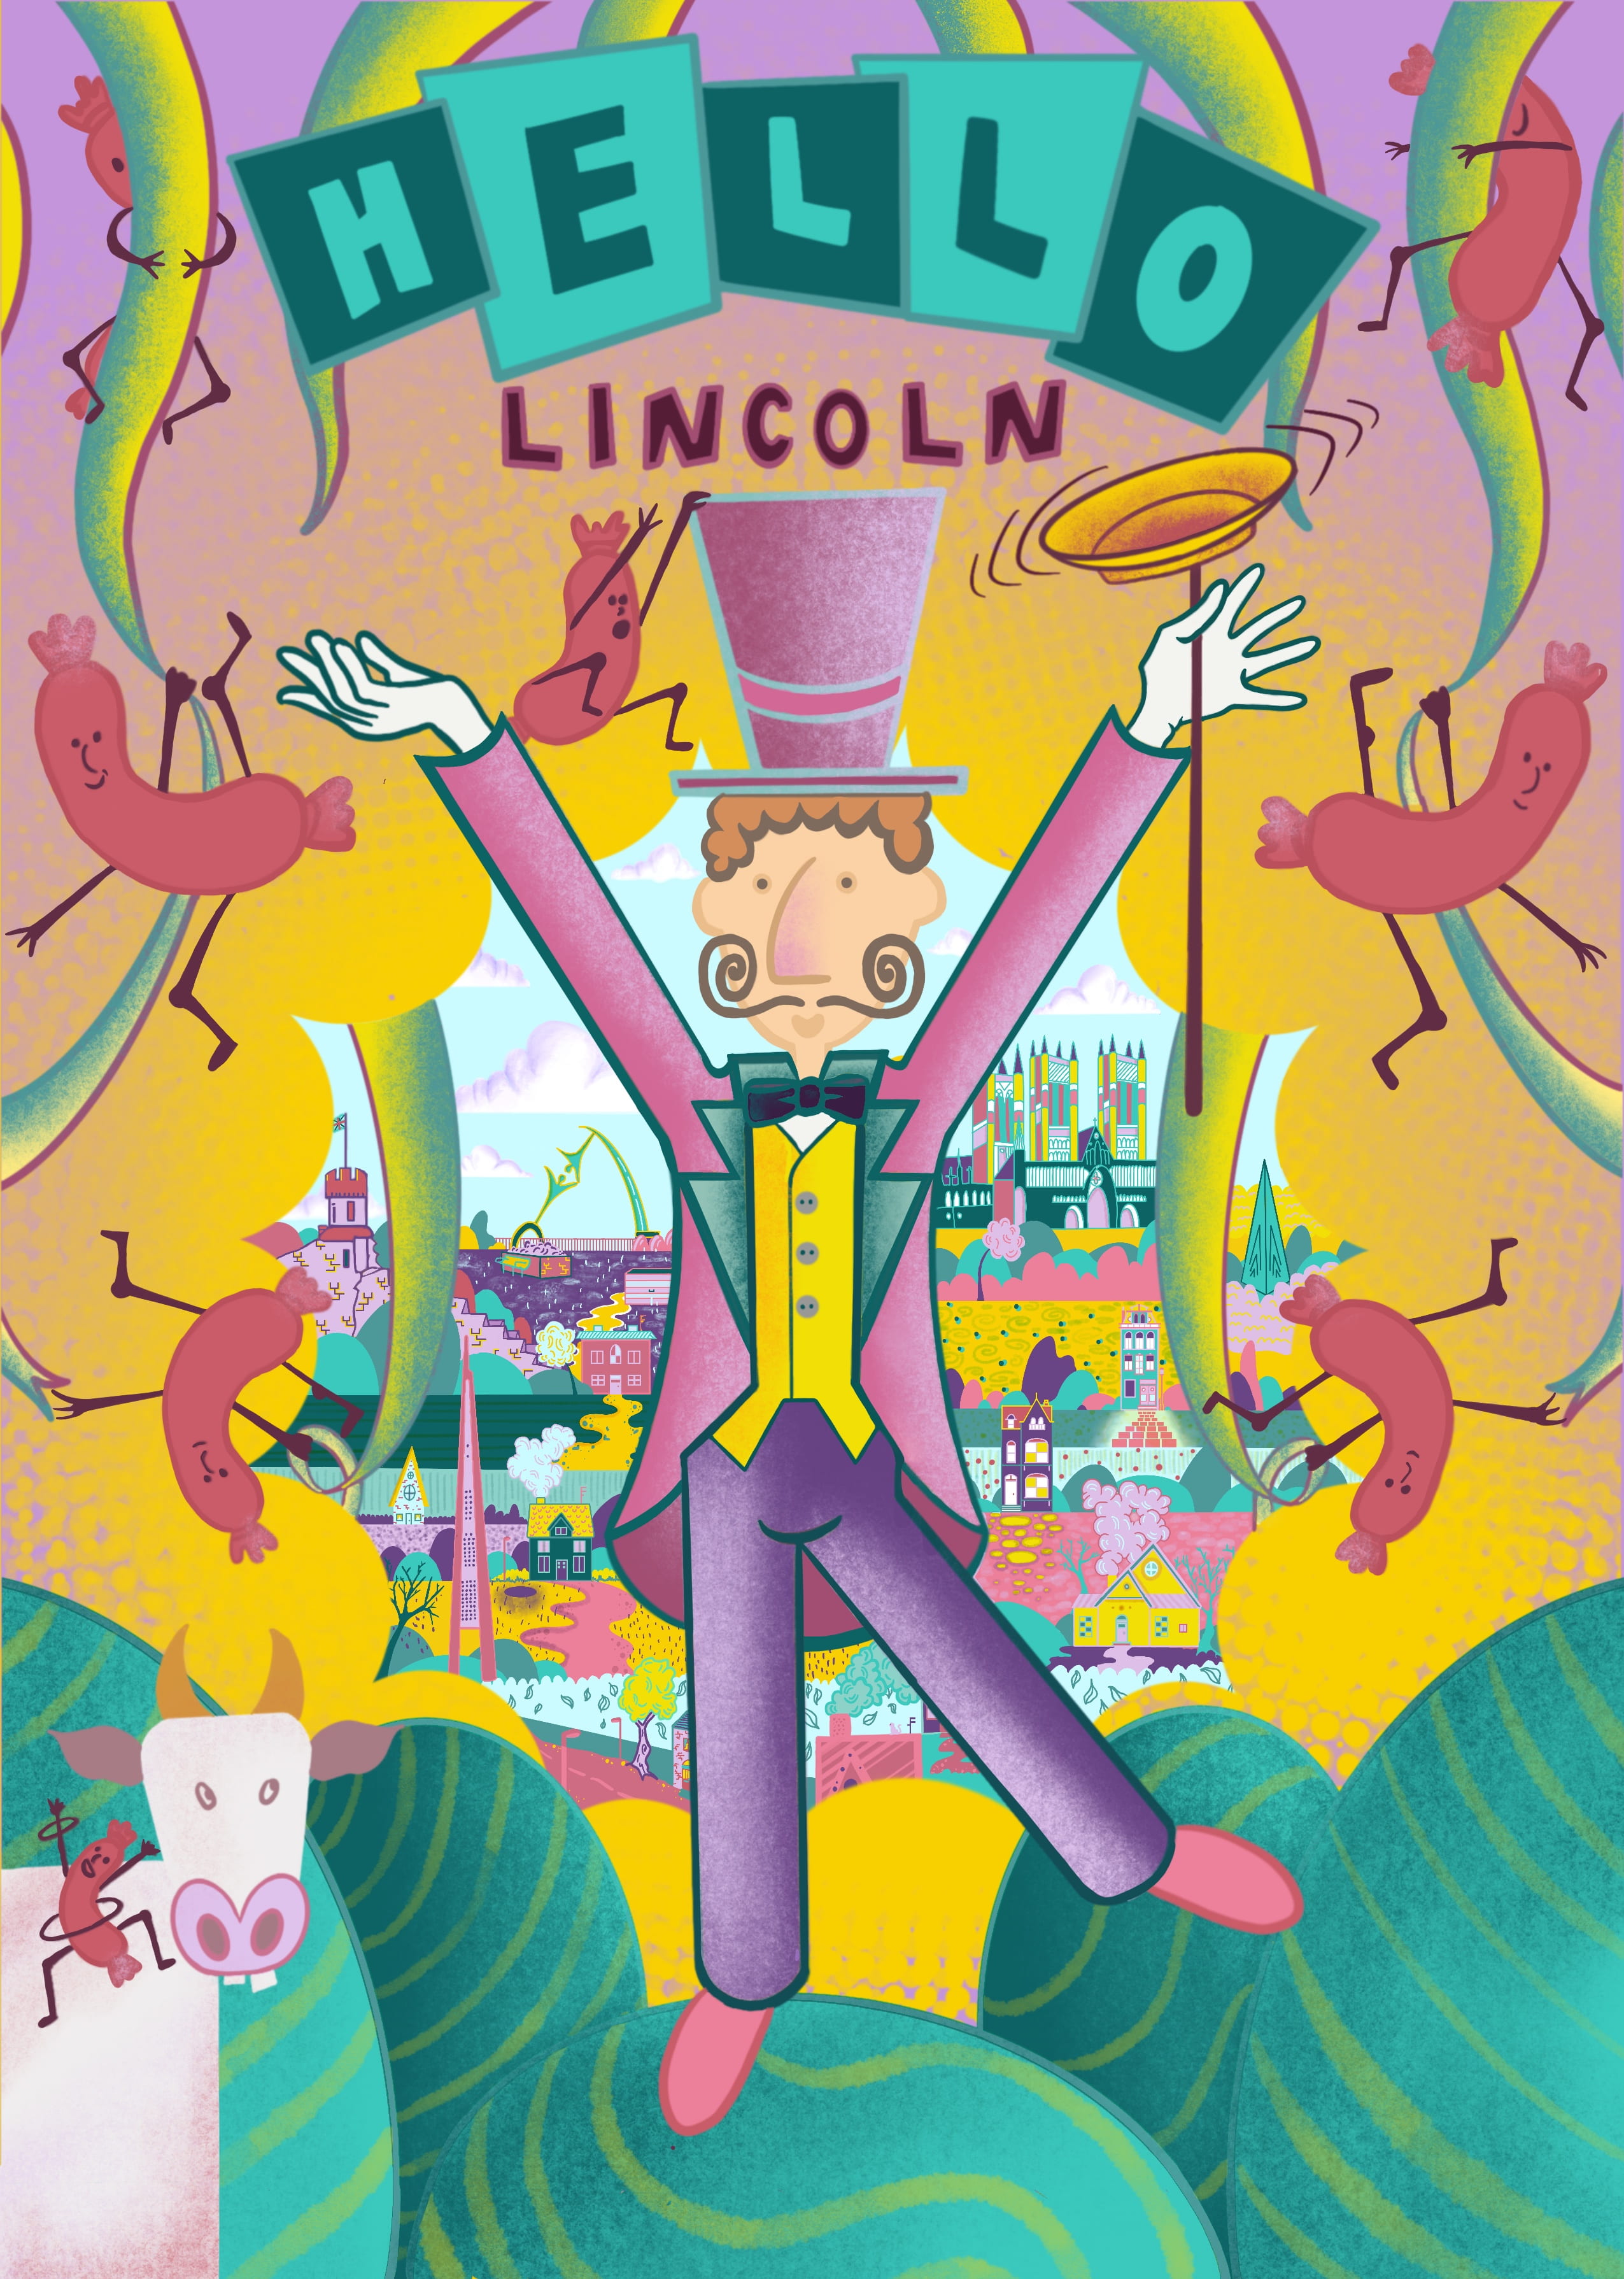 Illustration. Man in pink tail-coat and top-hat spinning a yellow plate on a stick. Title reads: Hello Lincoln.